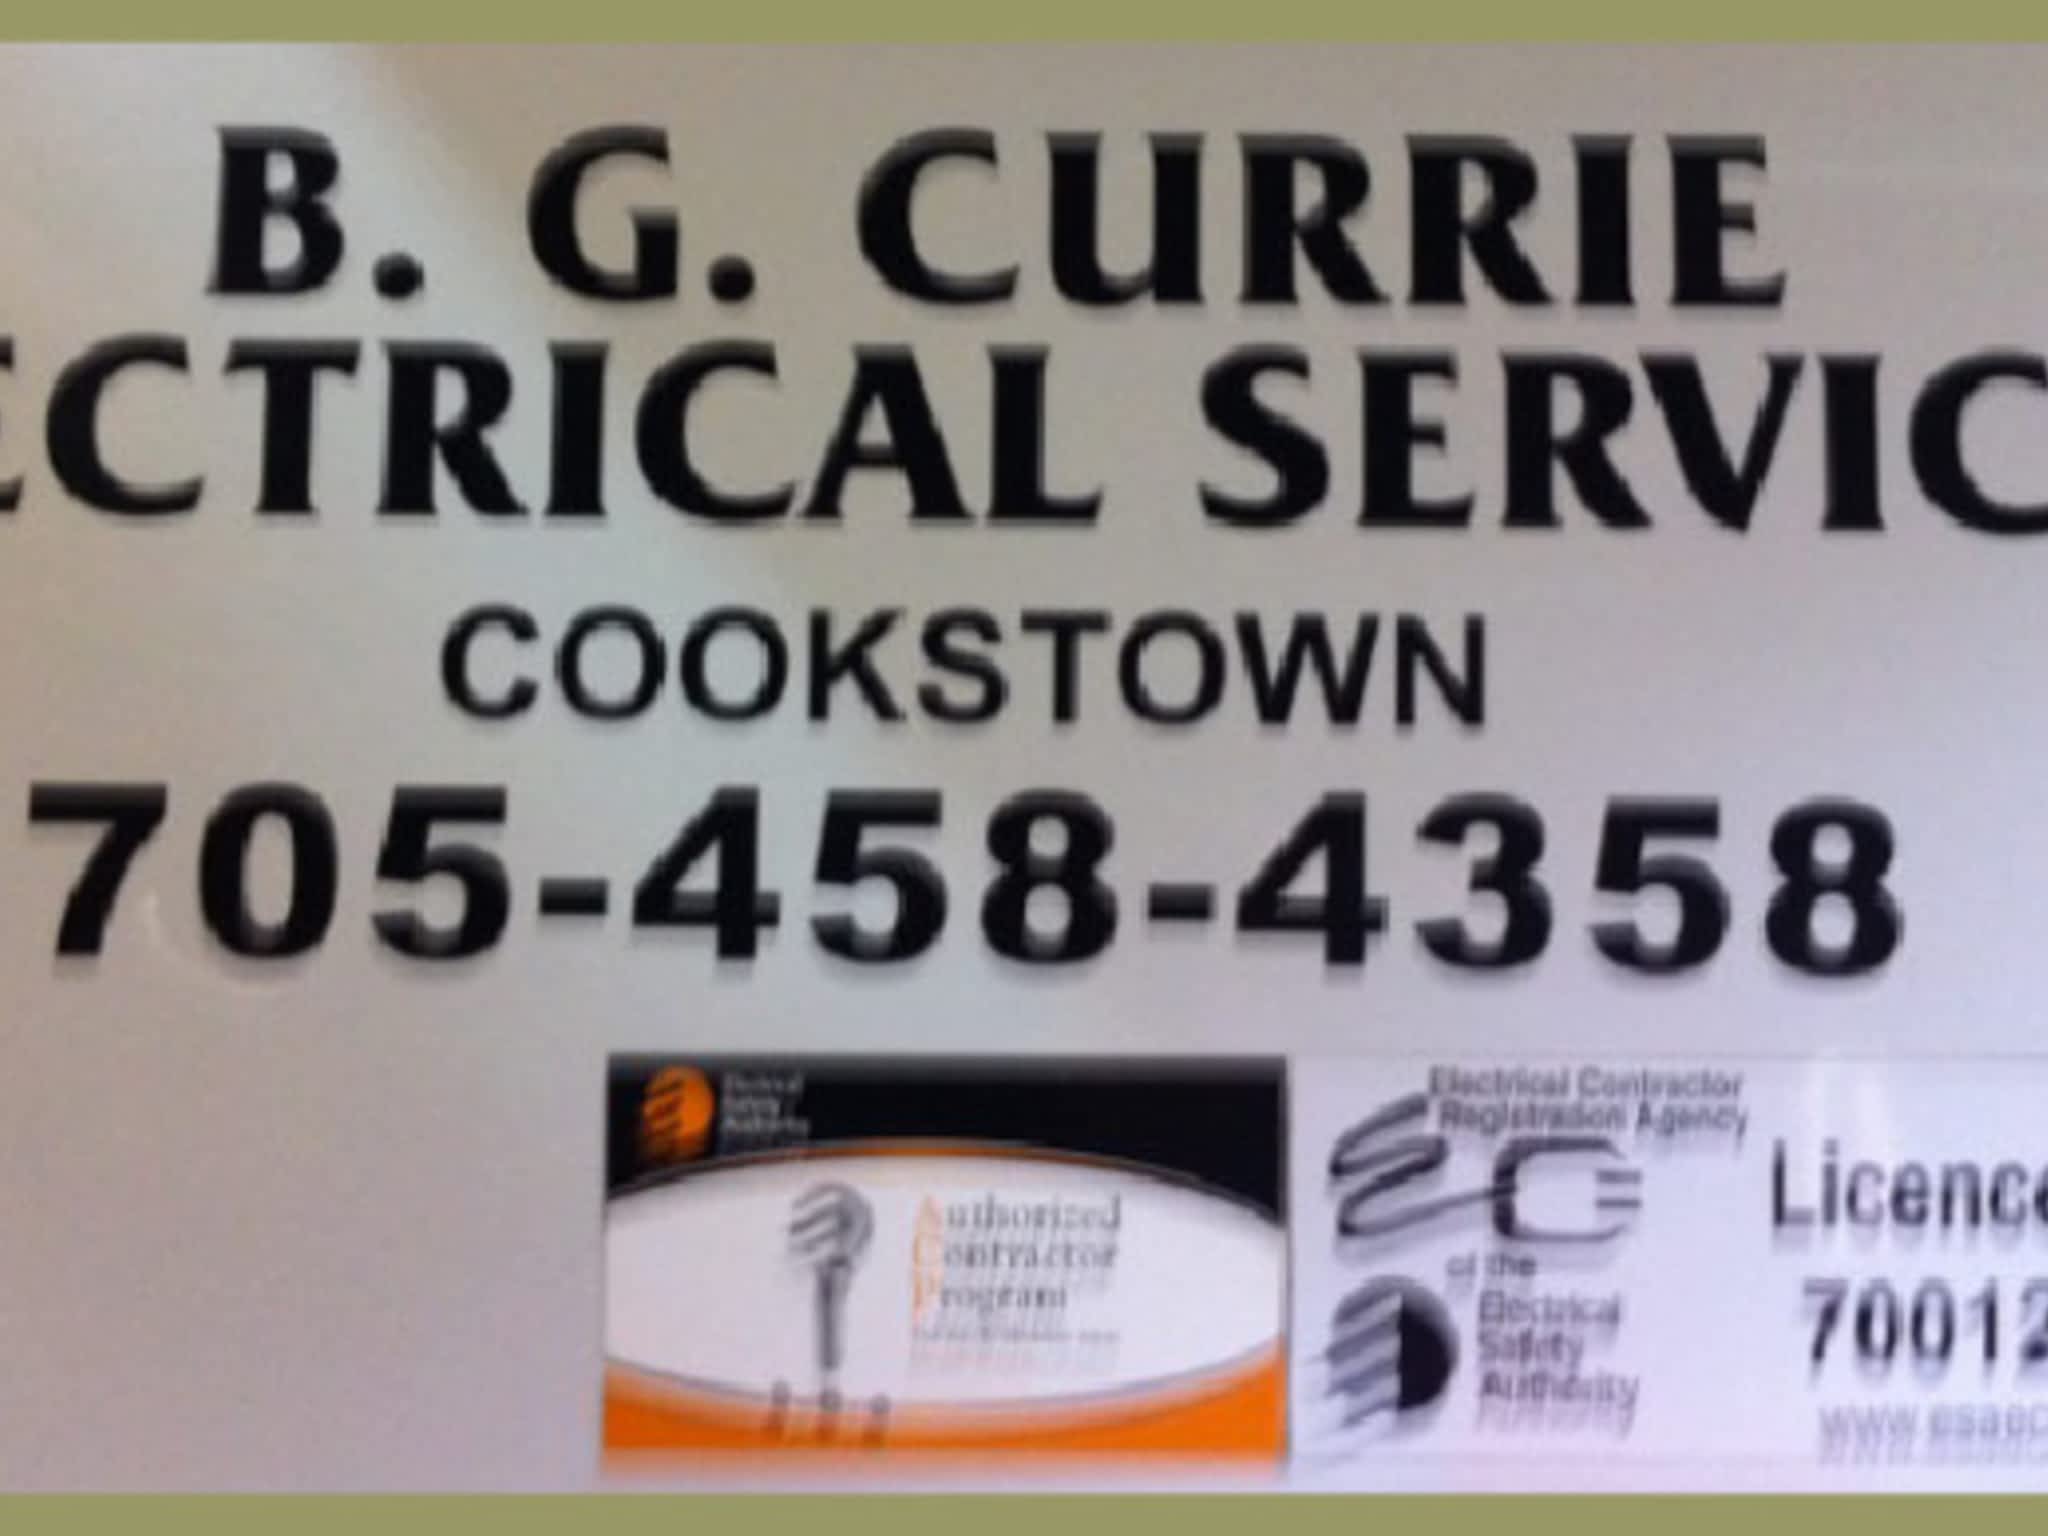 photo B G Currie Electrical Services